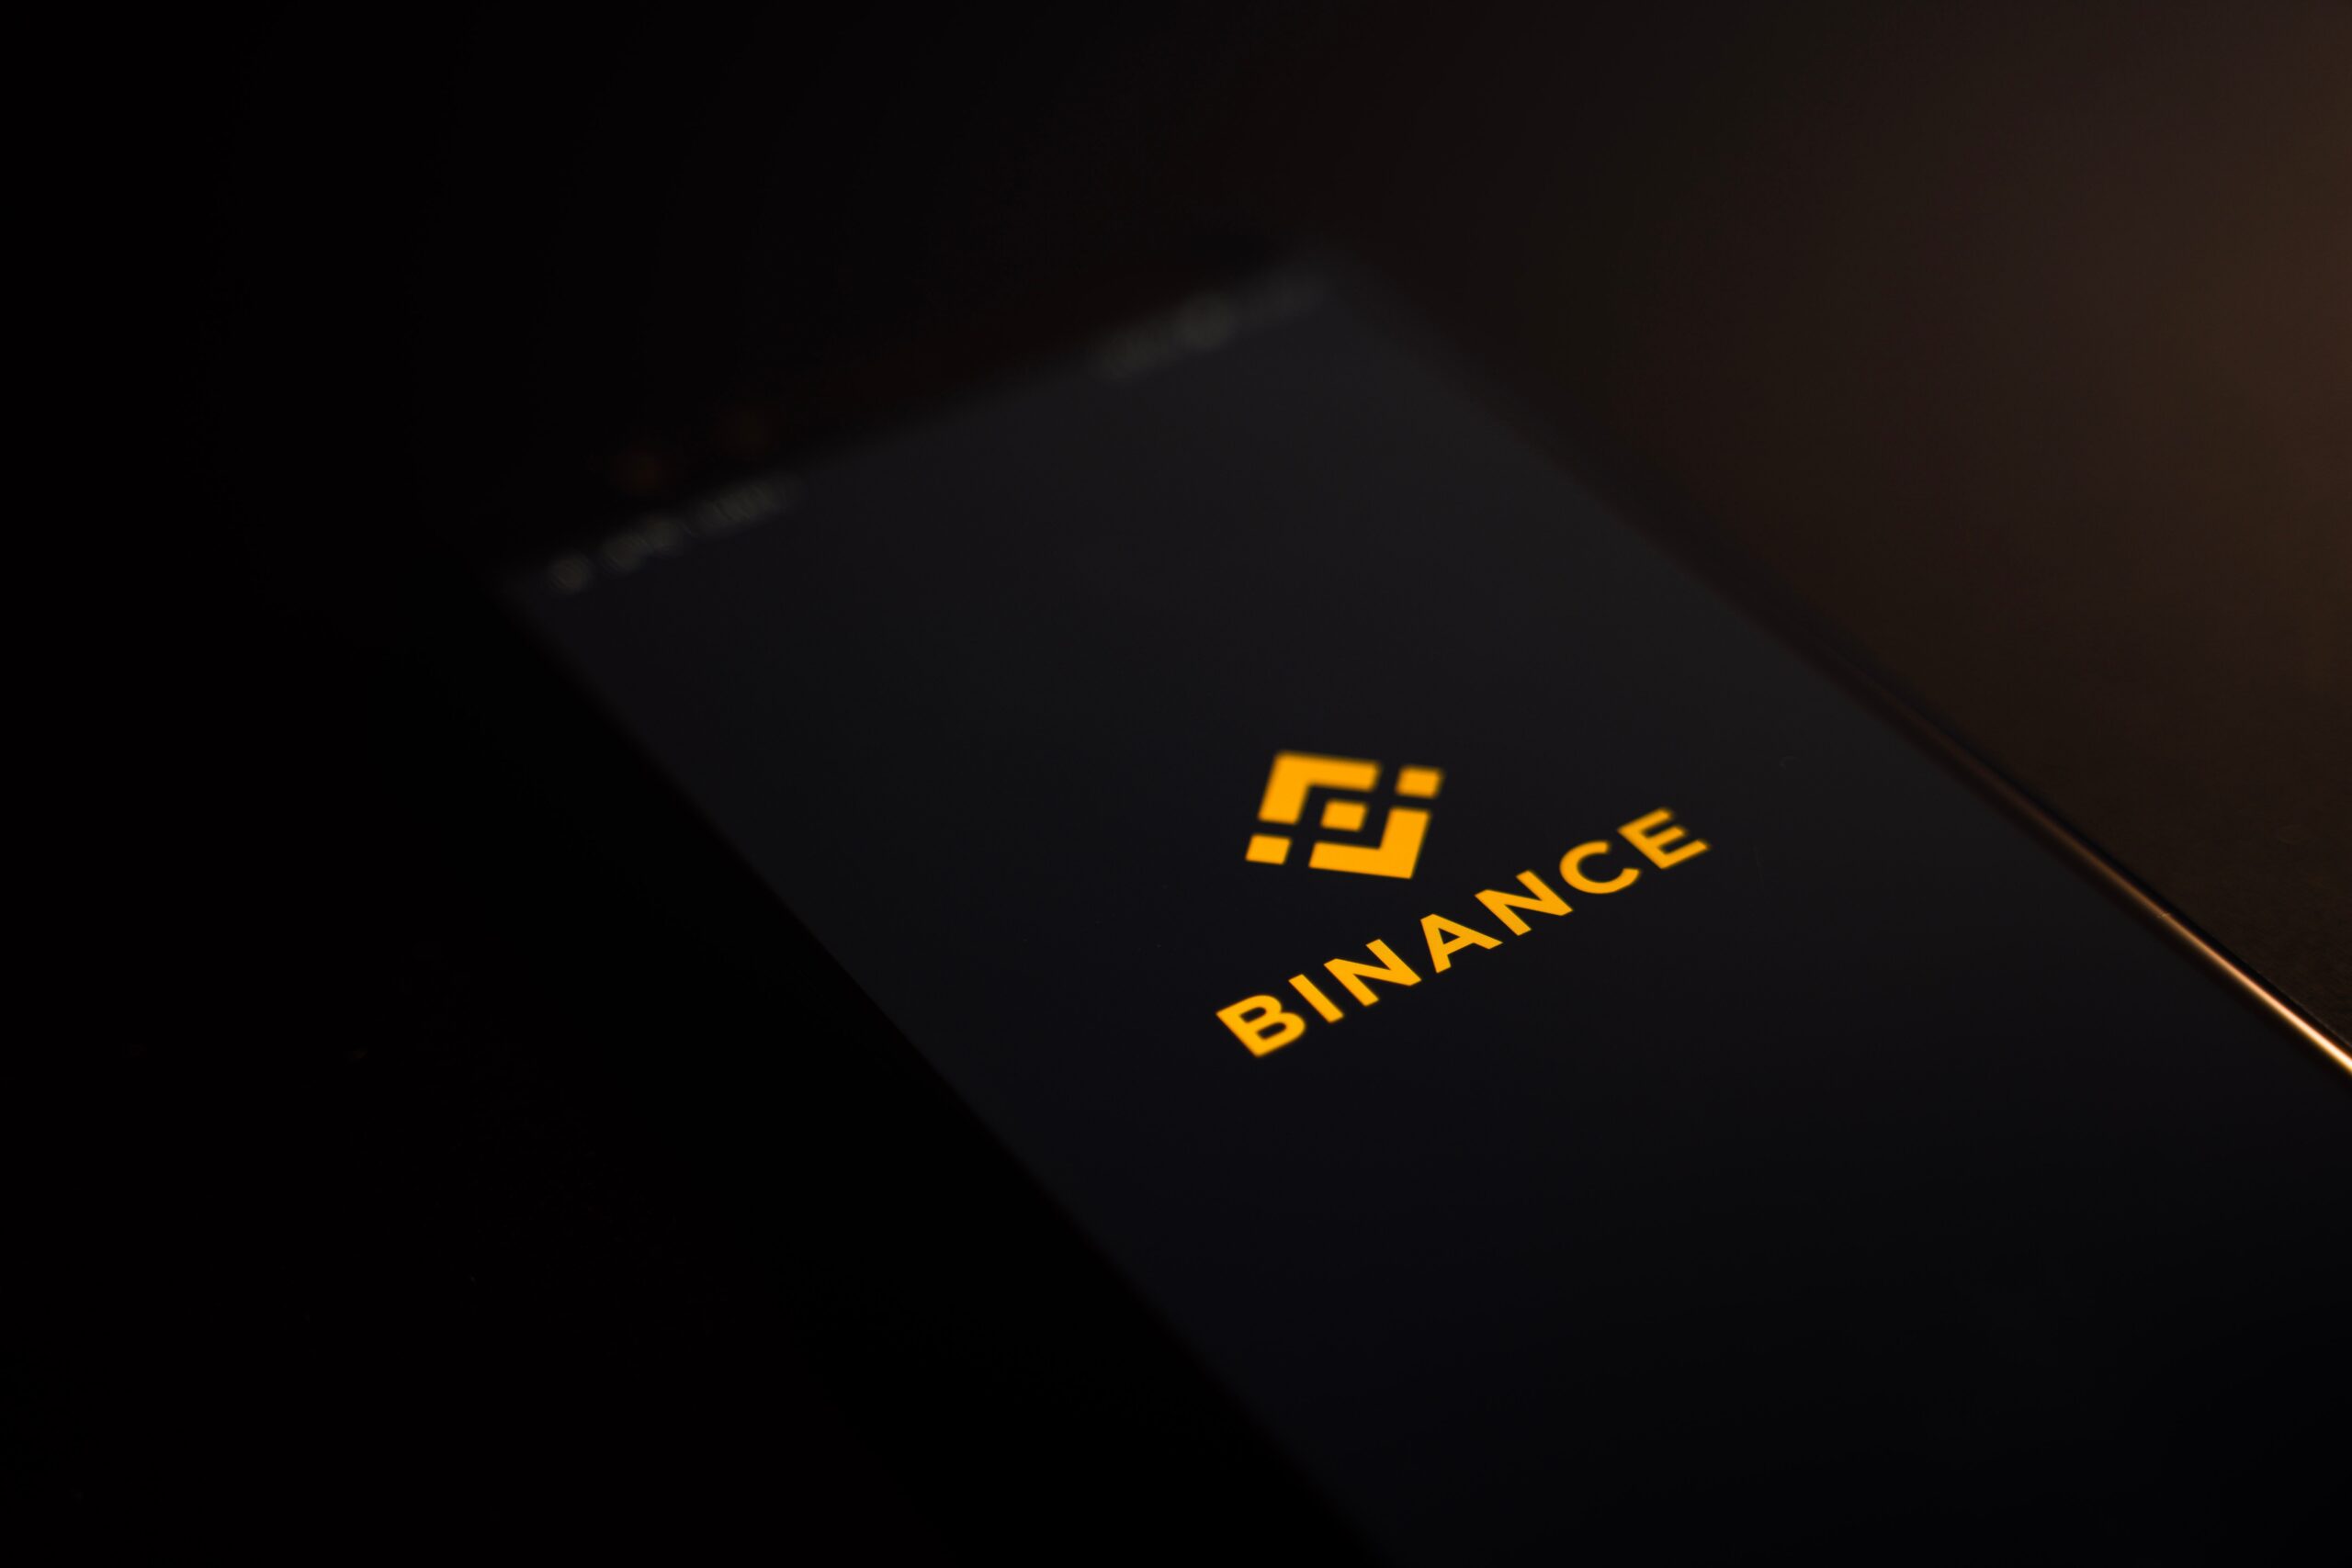 Binance Was Once FTX’s Rival. Now It’s Trying Not To Be Its Sequel